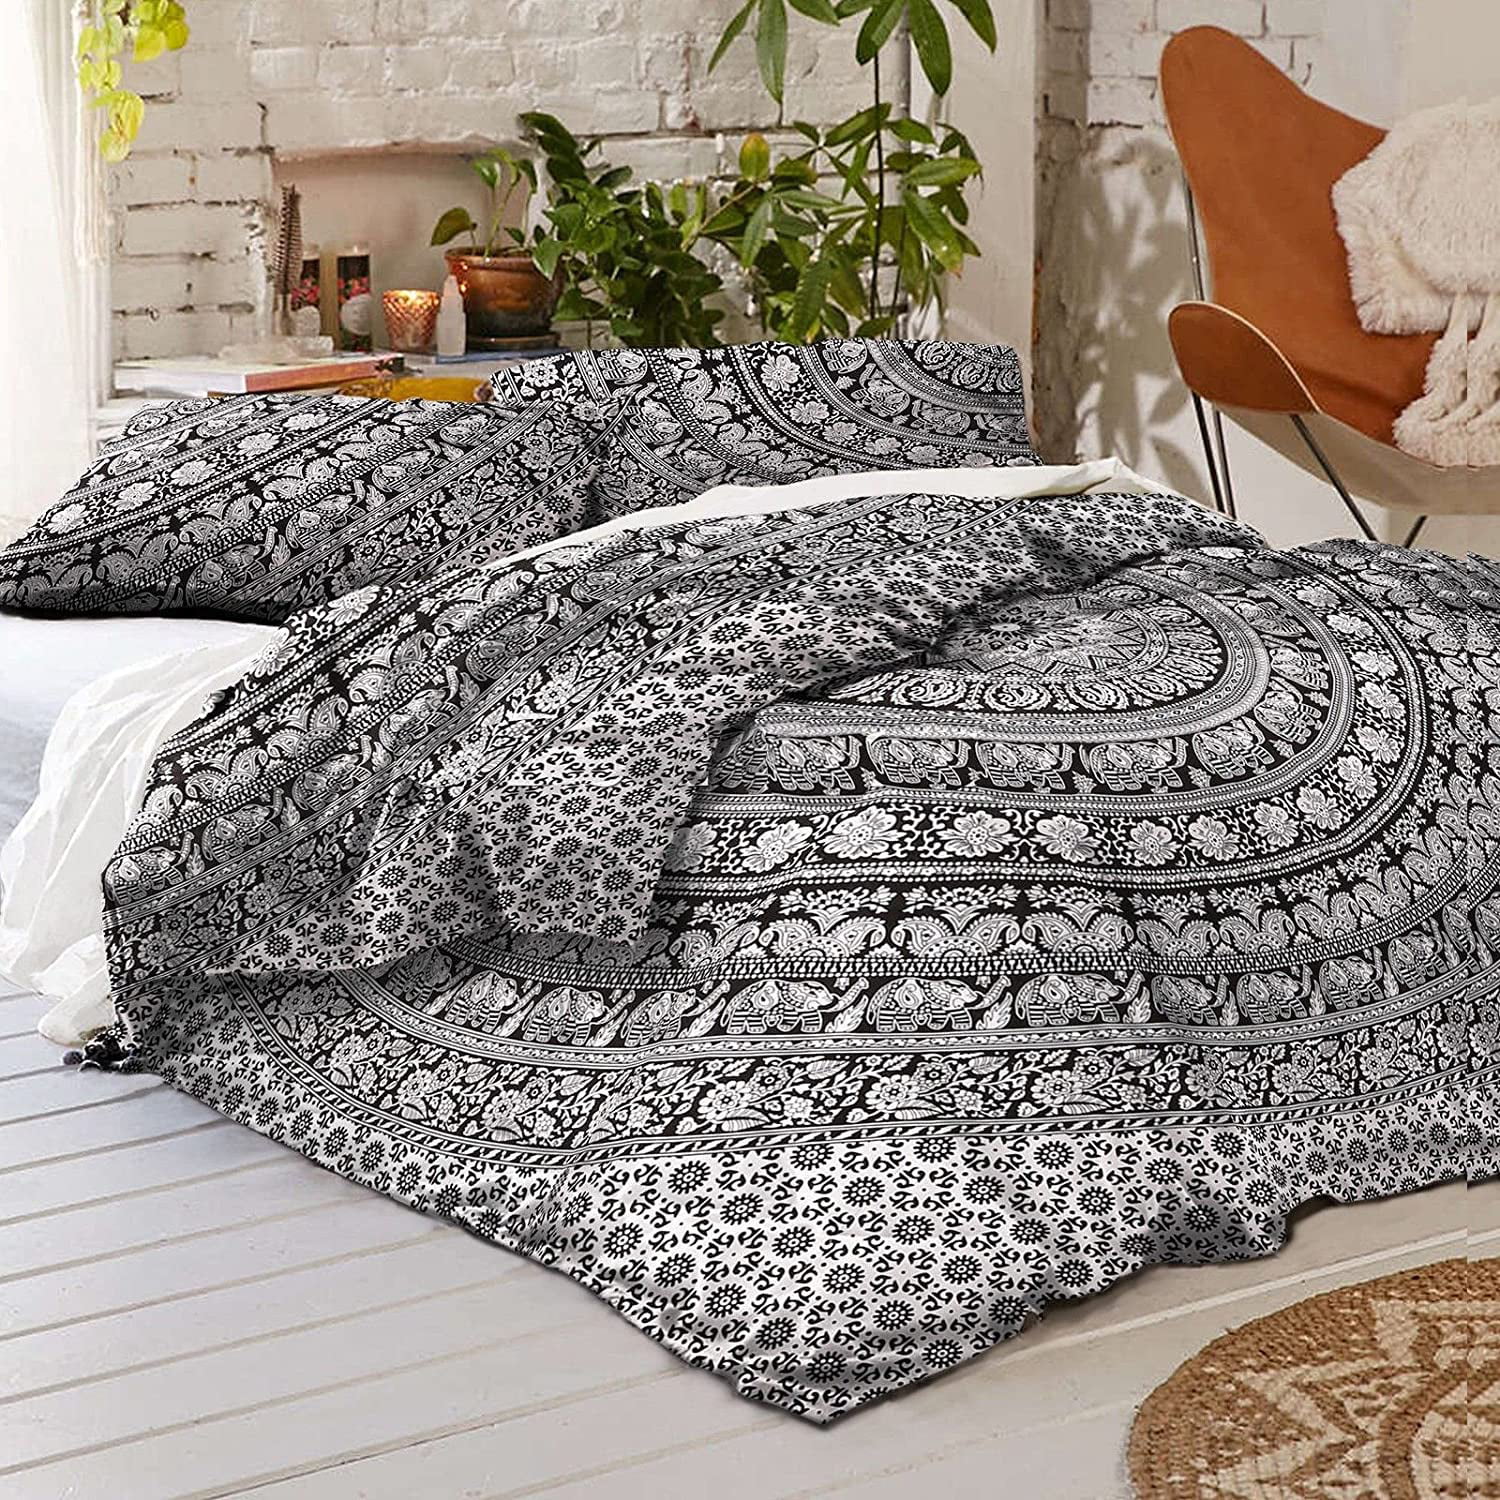 Indian Mandala Bedspread Beige Tree Cotton Bedding Throw With Pillow Cover King